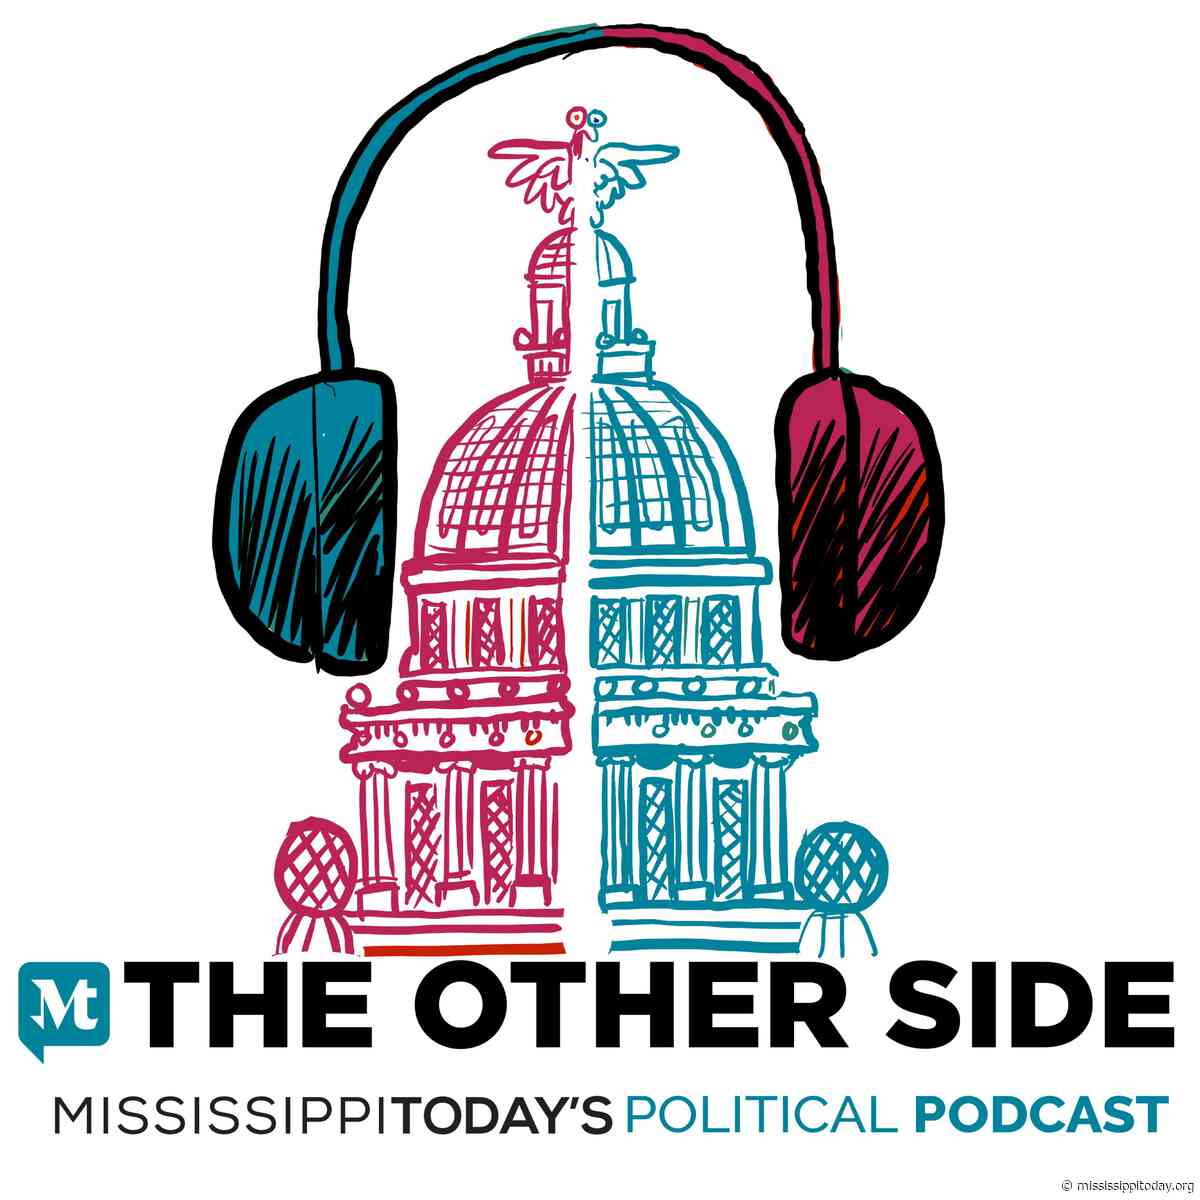 Podcast: Presumptive Medicaid eligibility promises to improve Mississippi’s high infant, maternal mortality rates, save taxpayers’ money